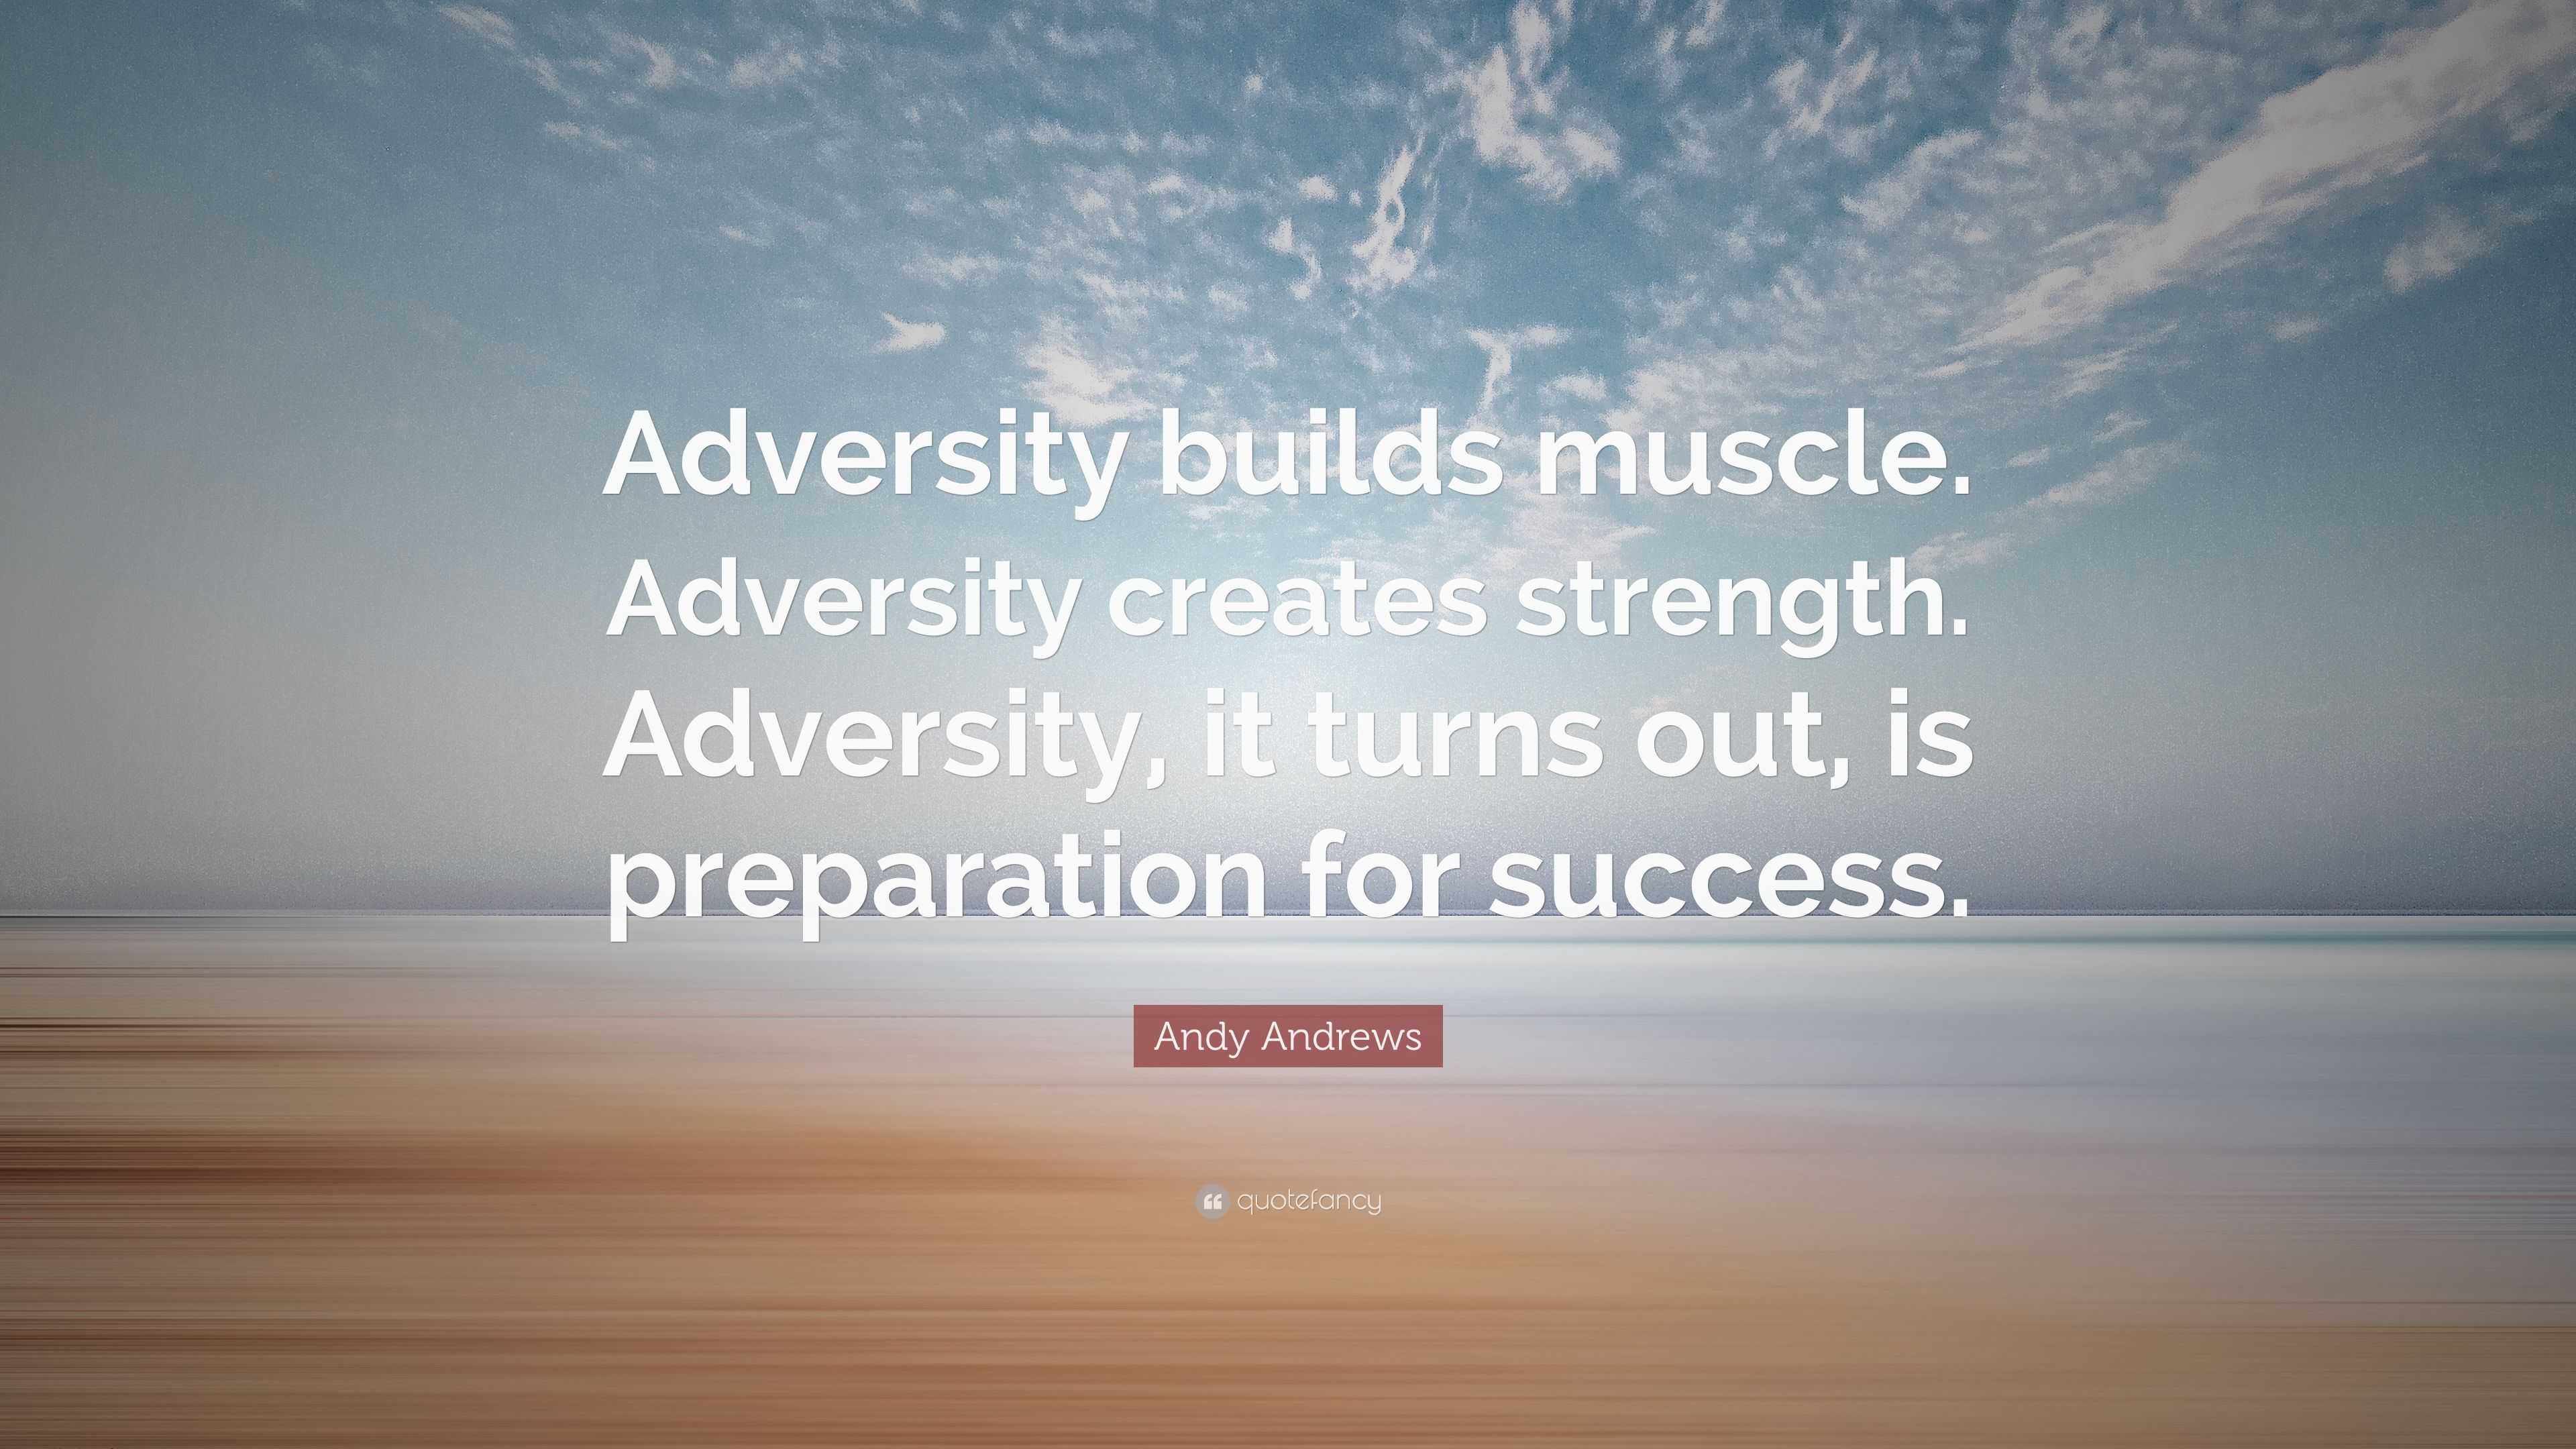 Andy Andrews Quote “Adversity builds muscle. Adversity